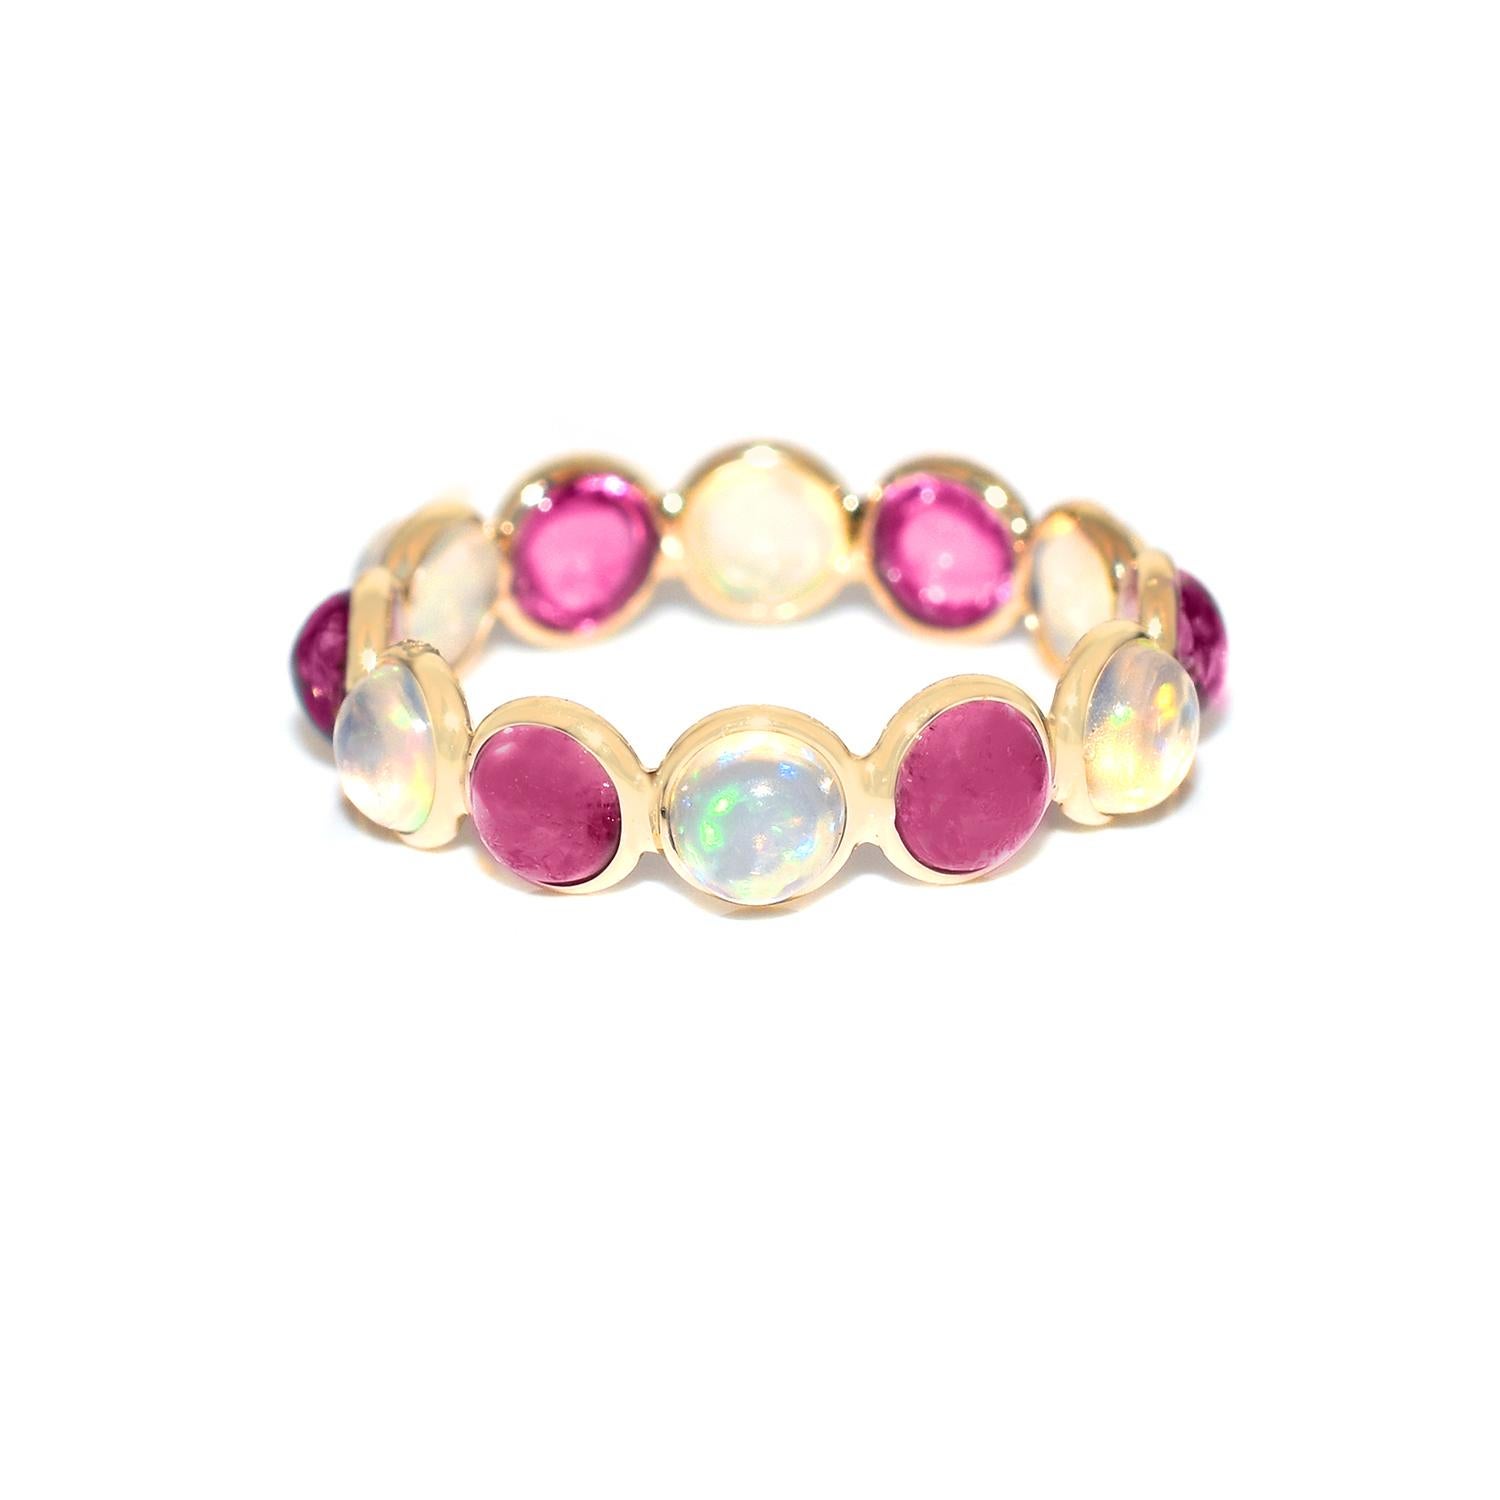 Shape: Round Cabochon

Stones: Opal and Pink Tourmaline 

Metal: 14 Karat Yellow Gold (can be customized)

Style: Single Line Band

Ring Size: US 6.25 (can be customized)

Stone Weight: appx. 3.50 carats of Opal and Pink Tourmaline 

Total Weight: